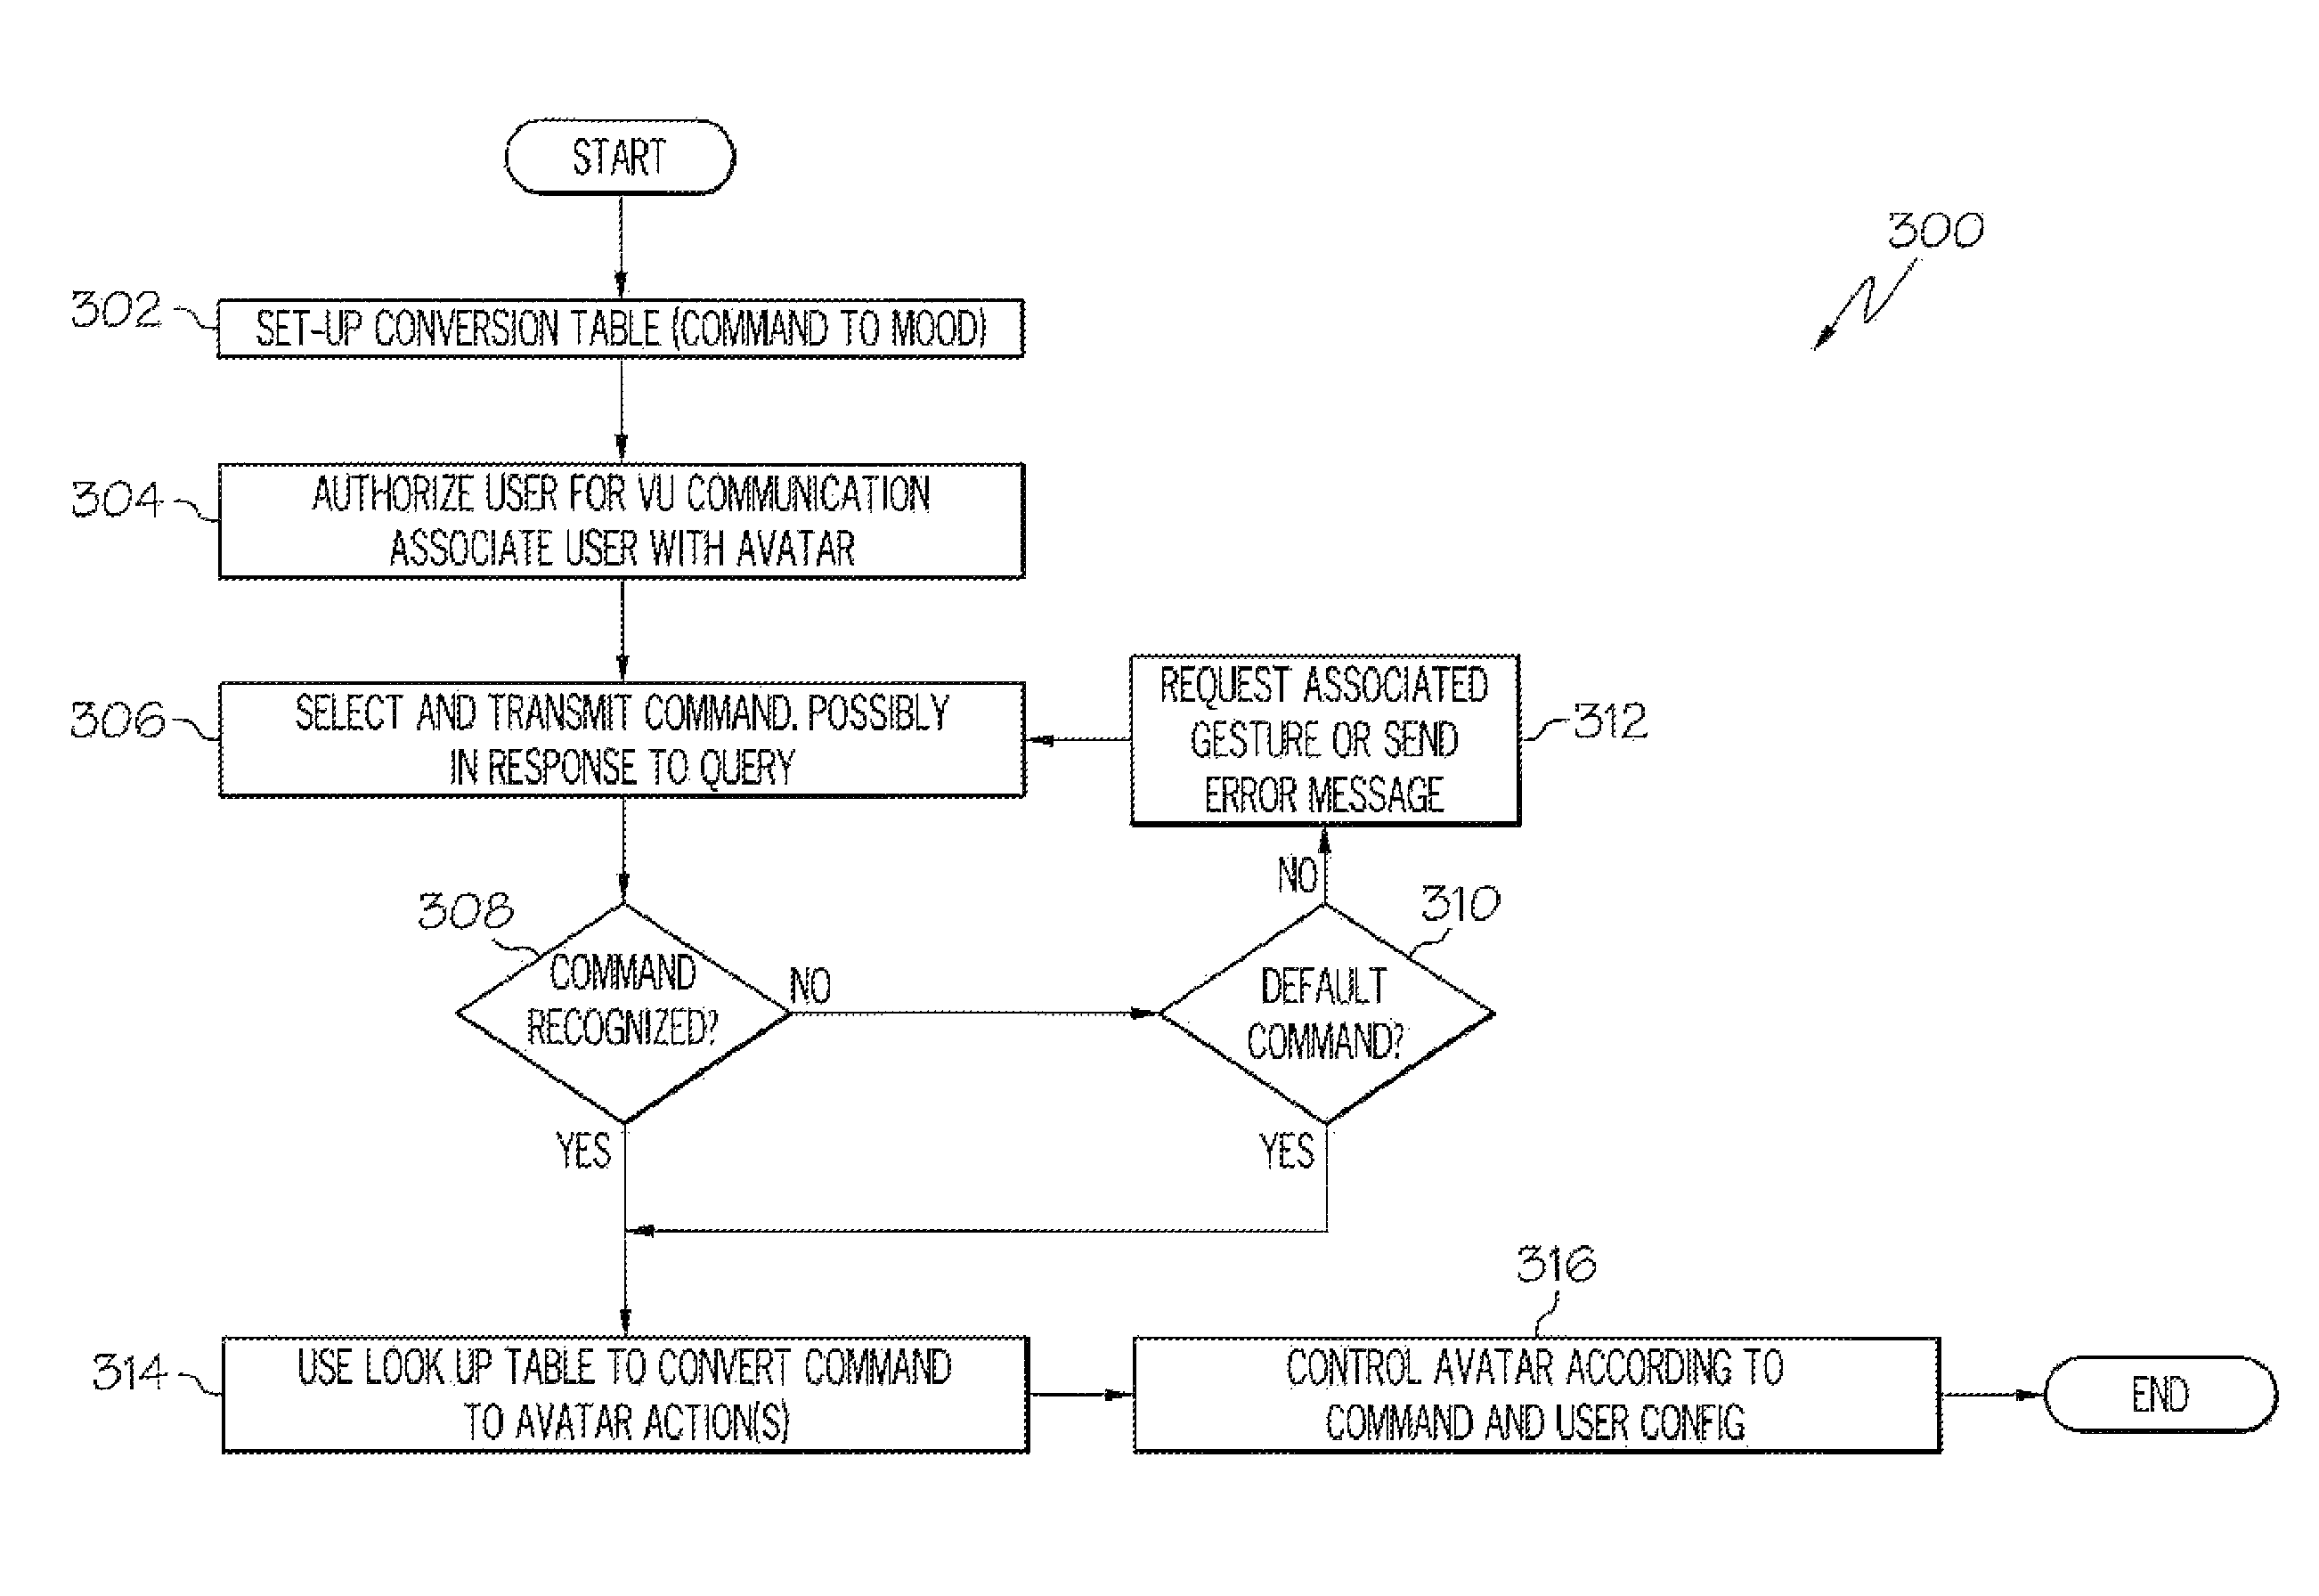 Arrangements for controlling activities of an avatar